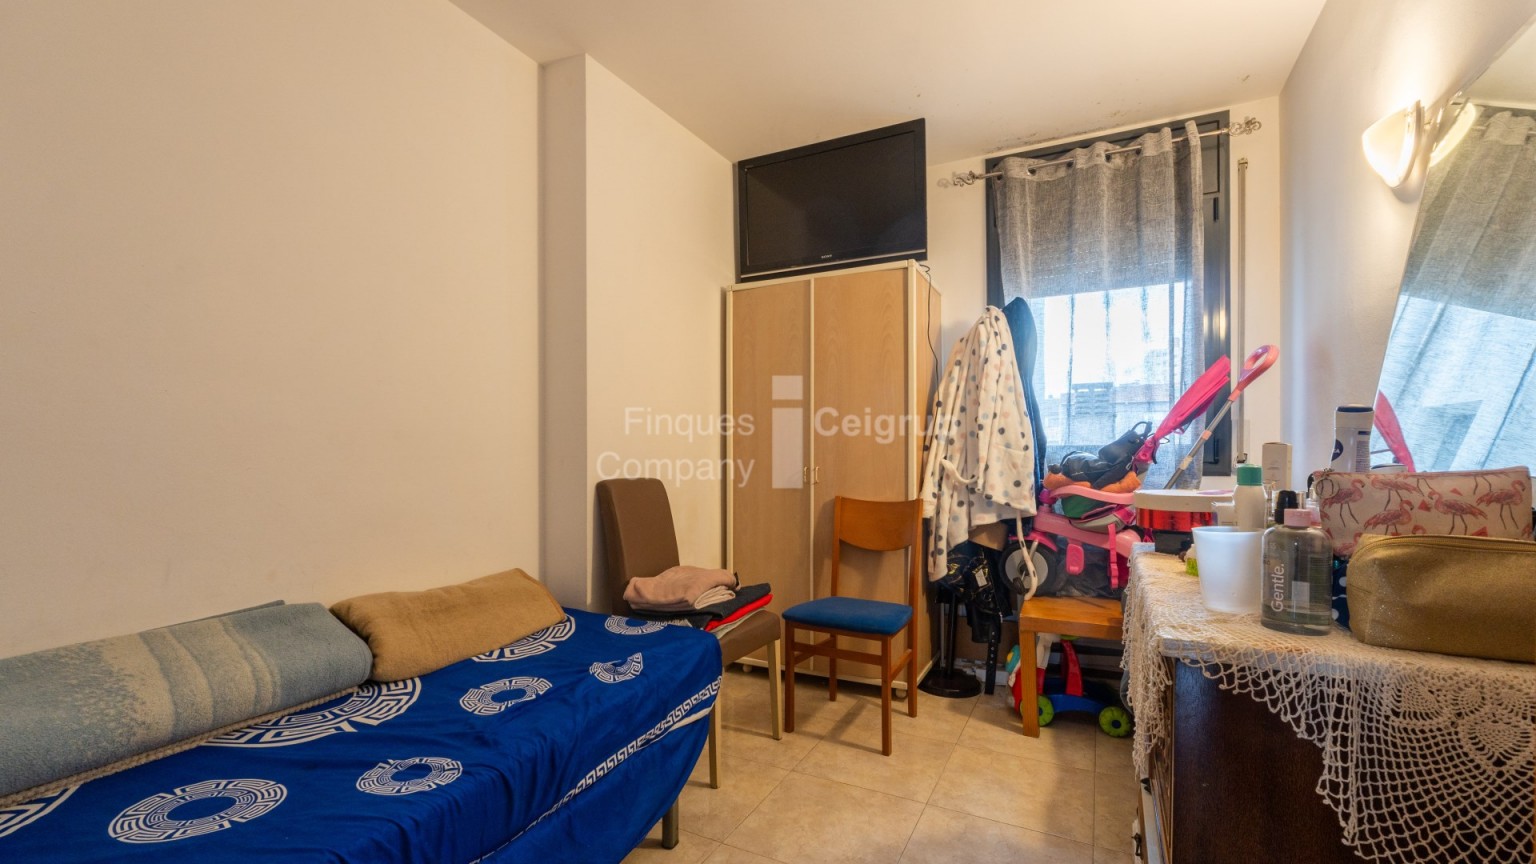 Flat for sale in the town of Salt, located in Mas Masó -Hospital